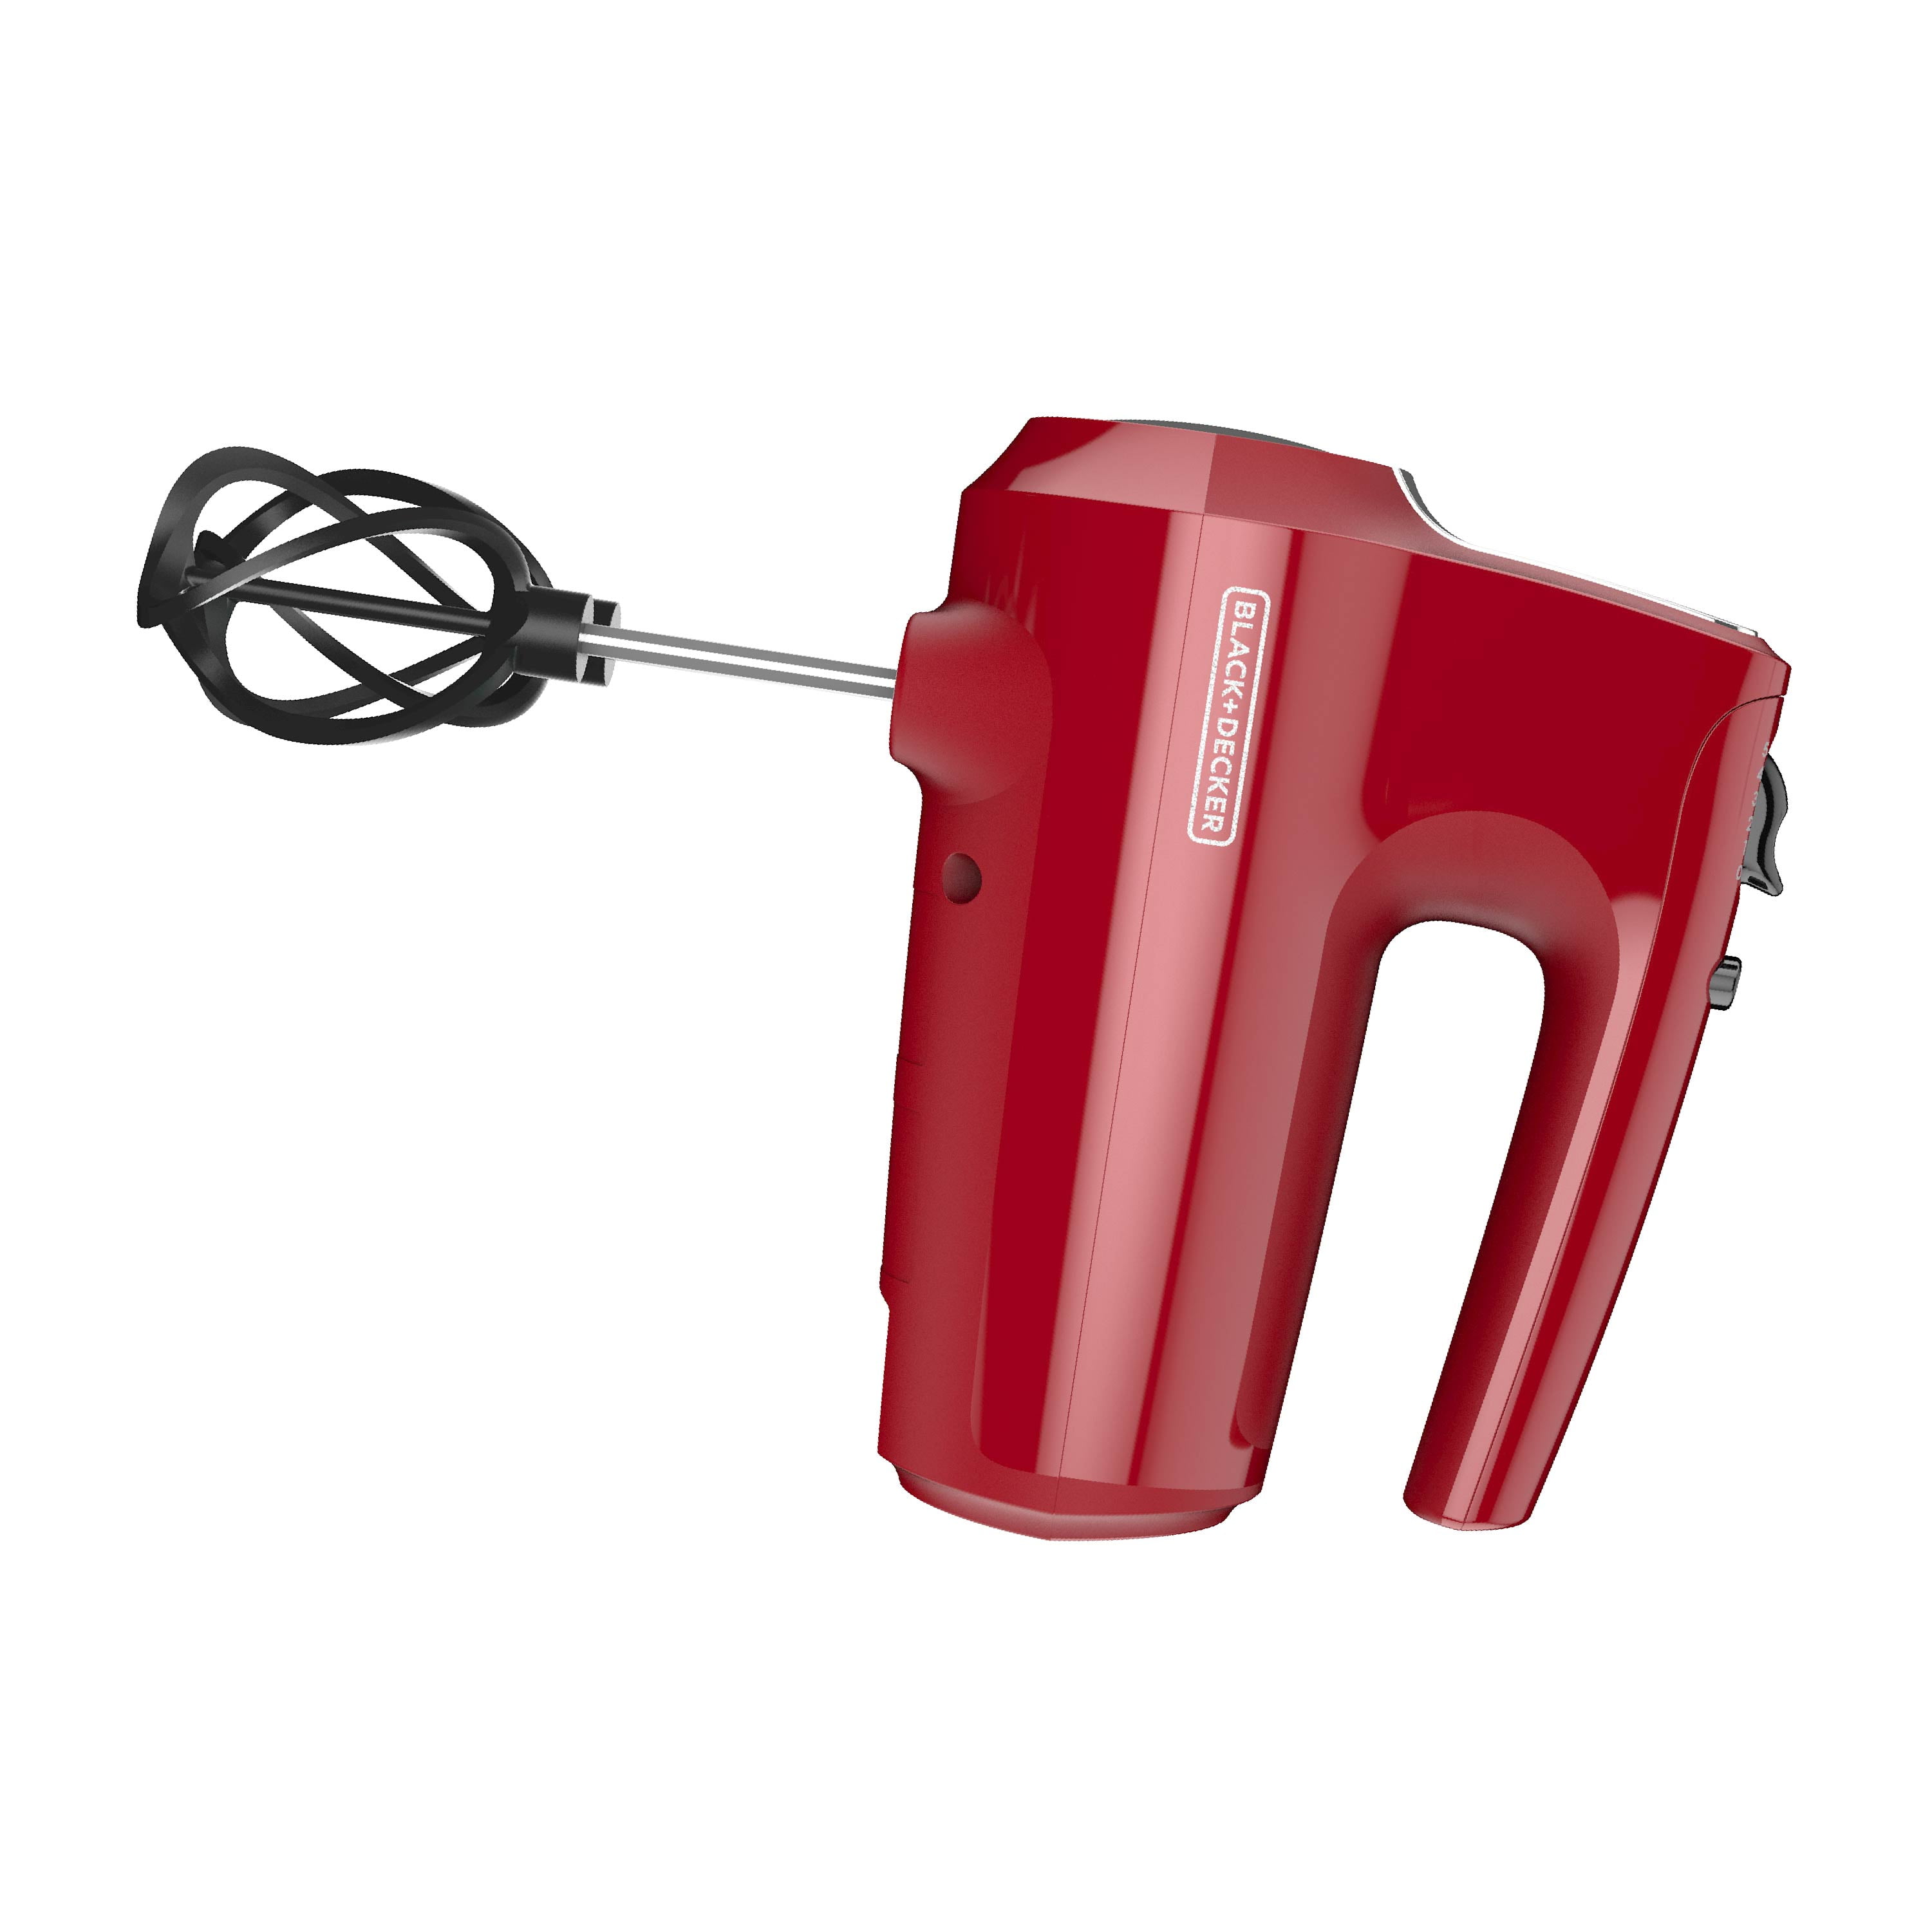 Black+Decker Helix Performance Premium 5-Speed Hand Mixer – One Home Therapy